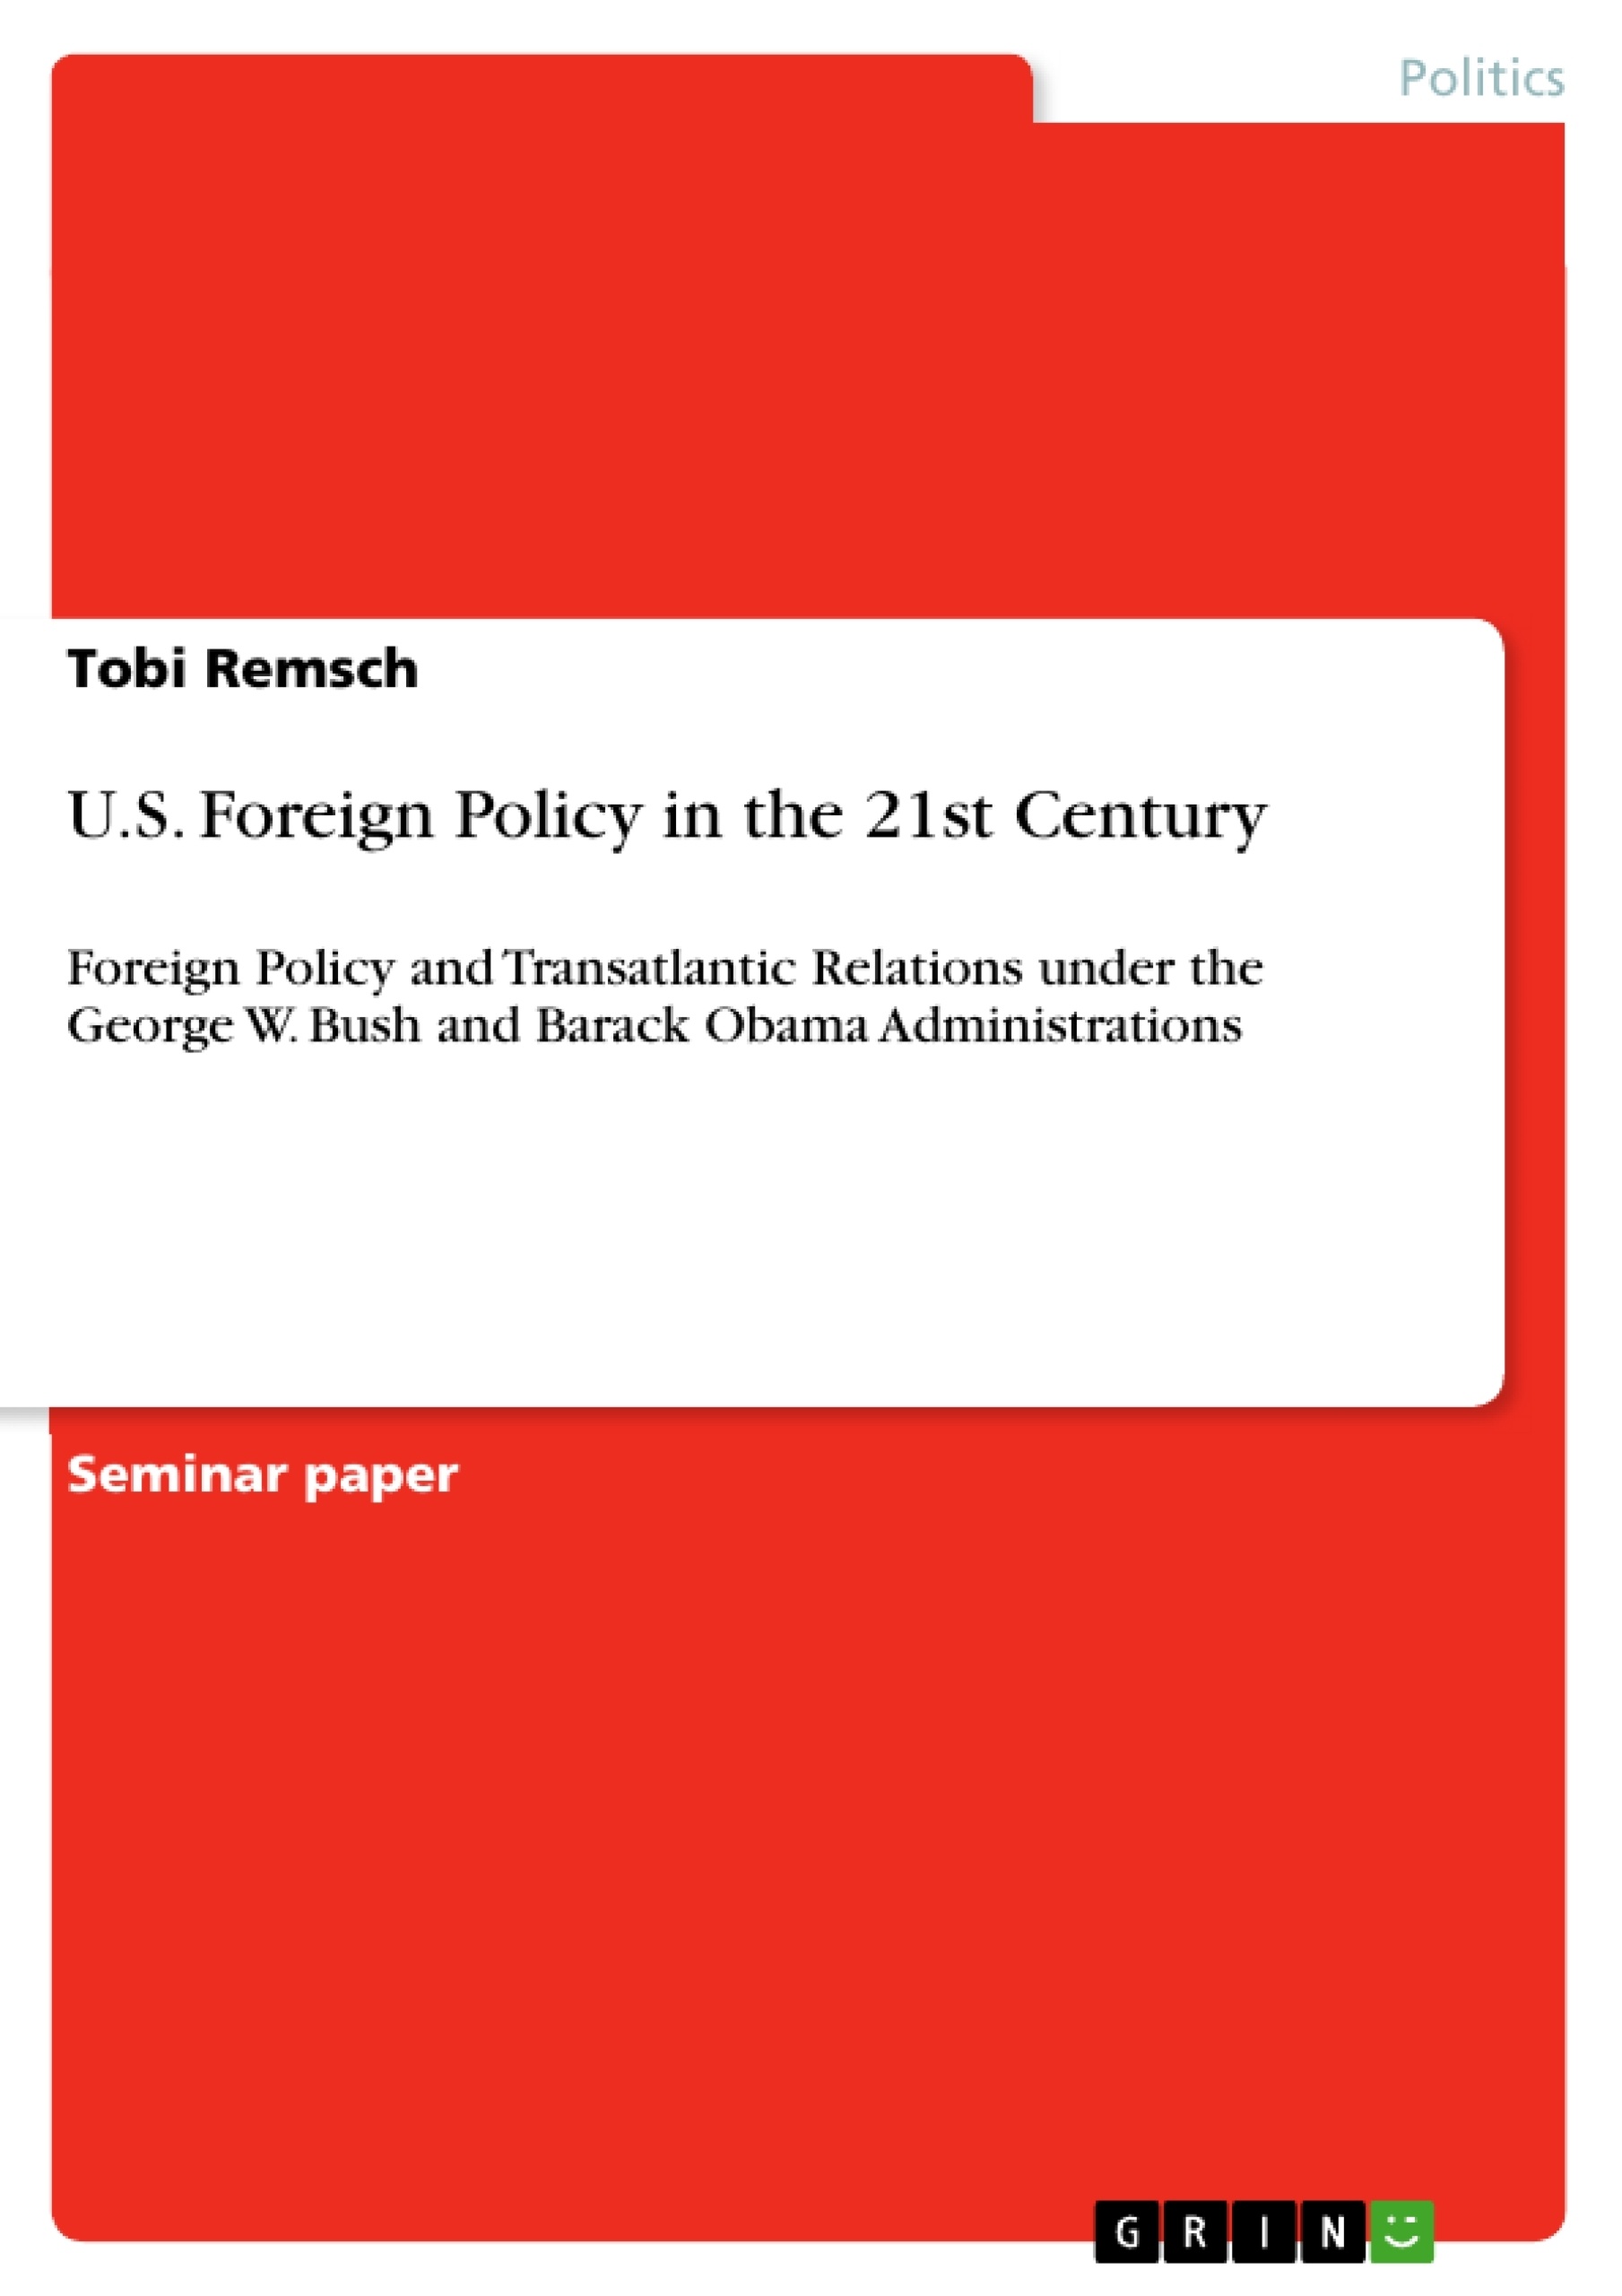 Title: U.S. Foreign Policy in the 21st Century